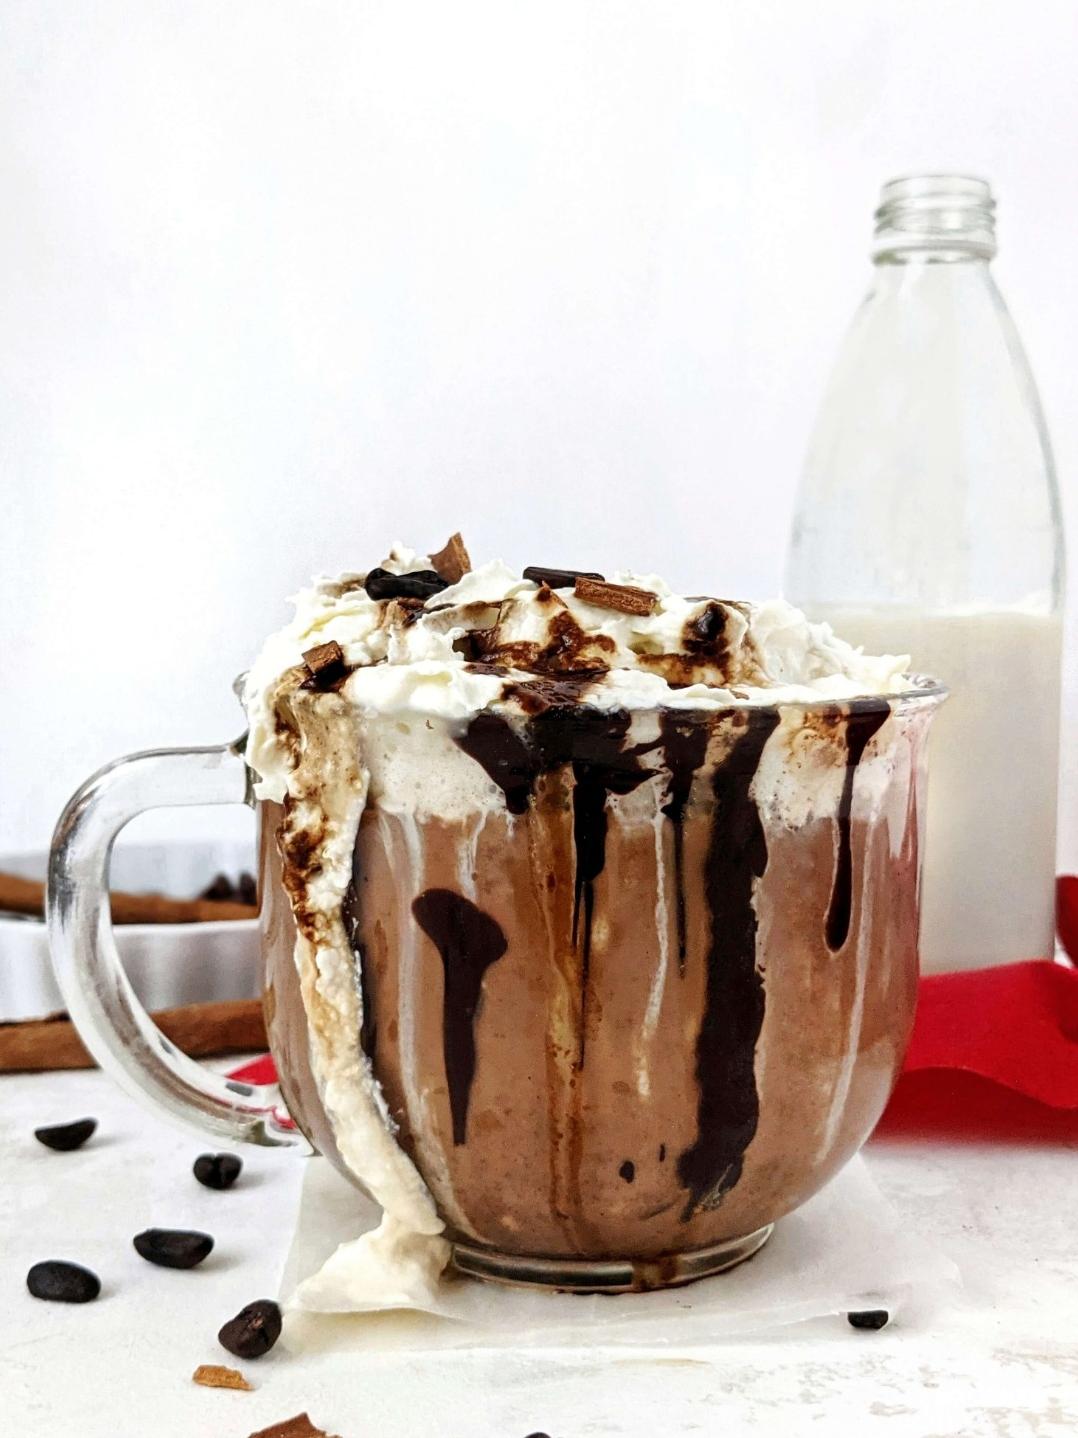  Indulge in a guilt-free cup of mocha hot chocolate